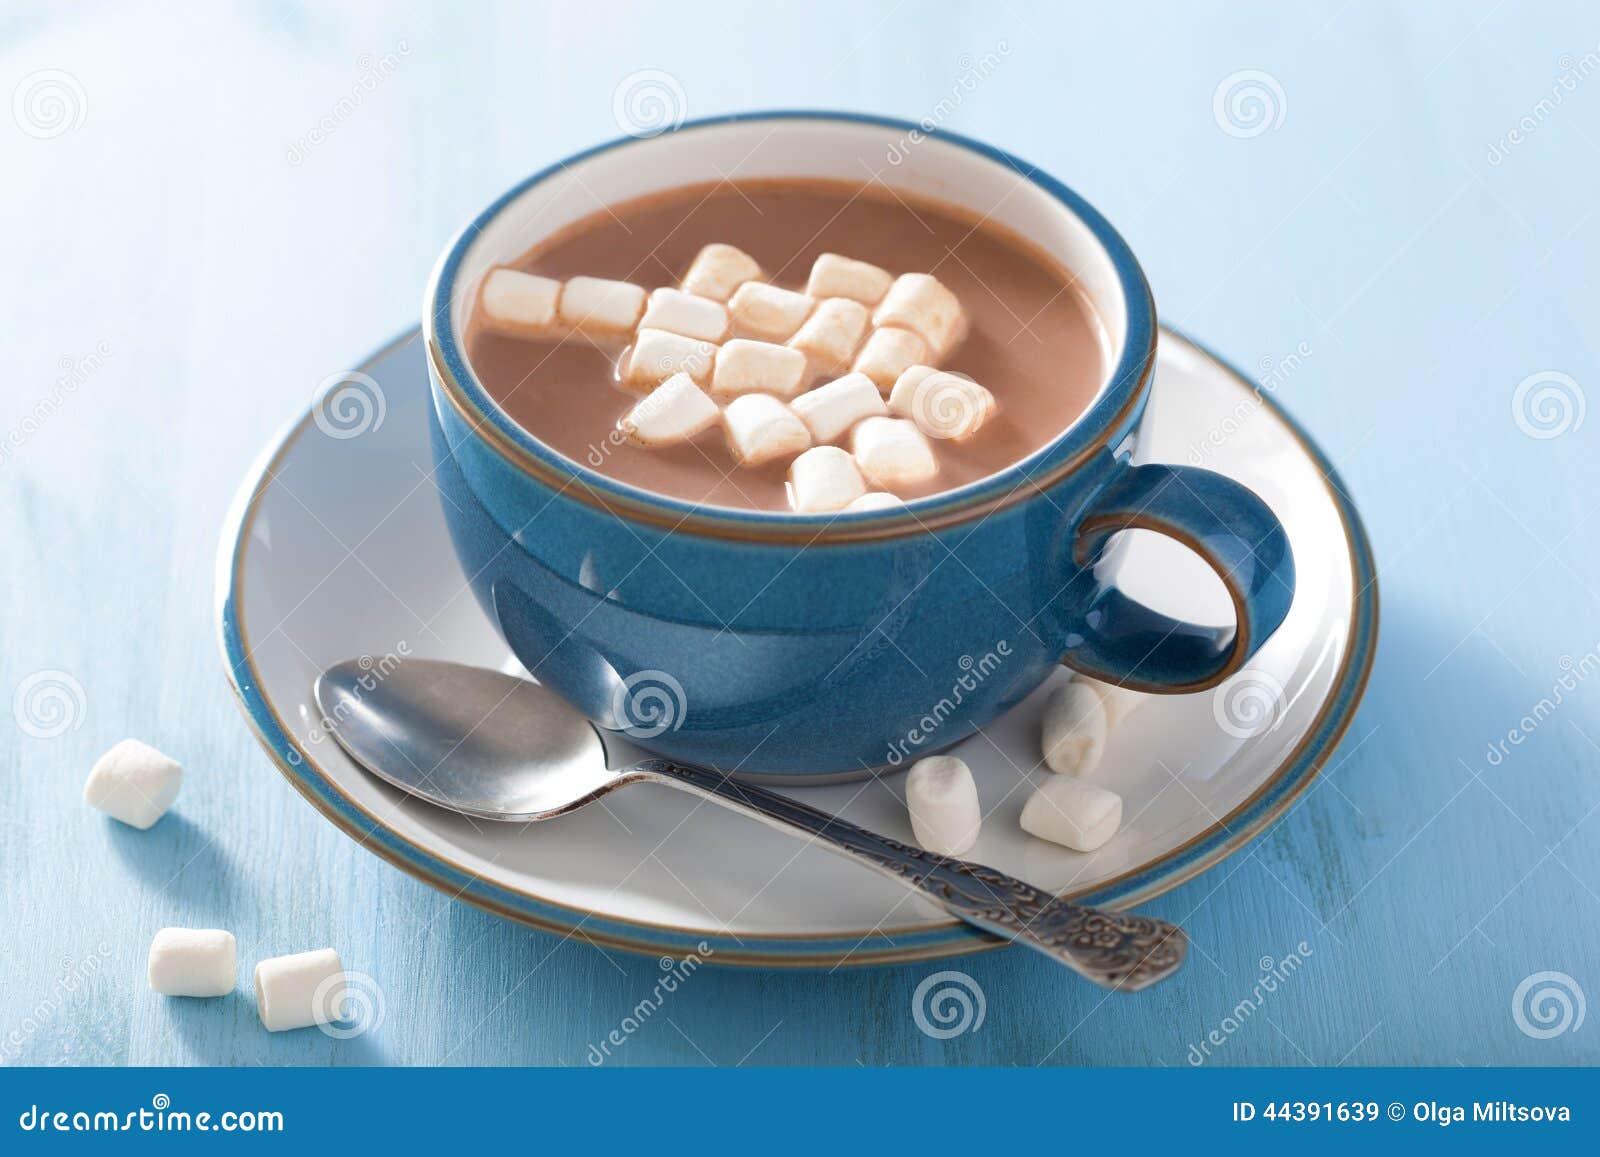 Hot Chocolate with Mini Marshmallows Stock Image - Image of unhealthy ...